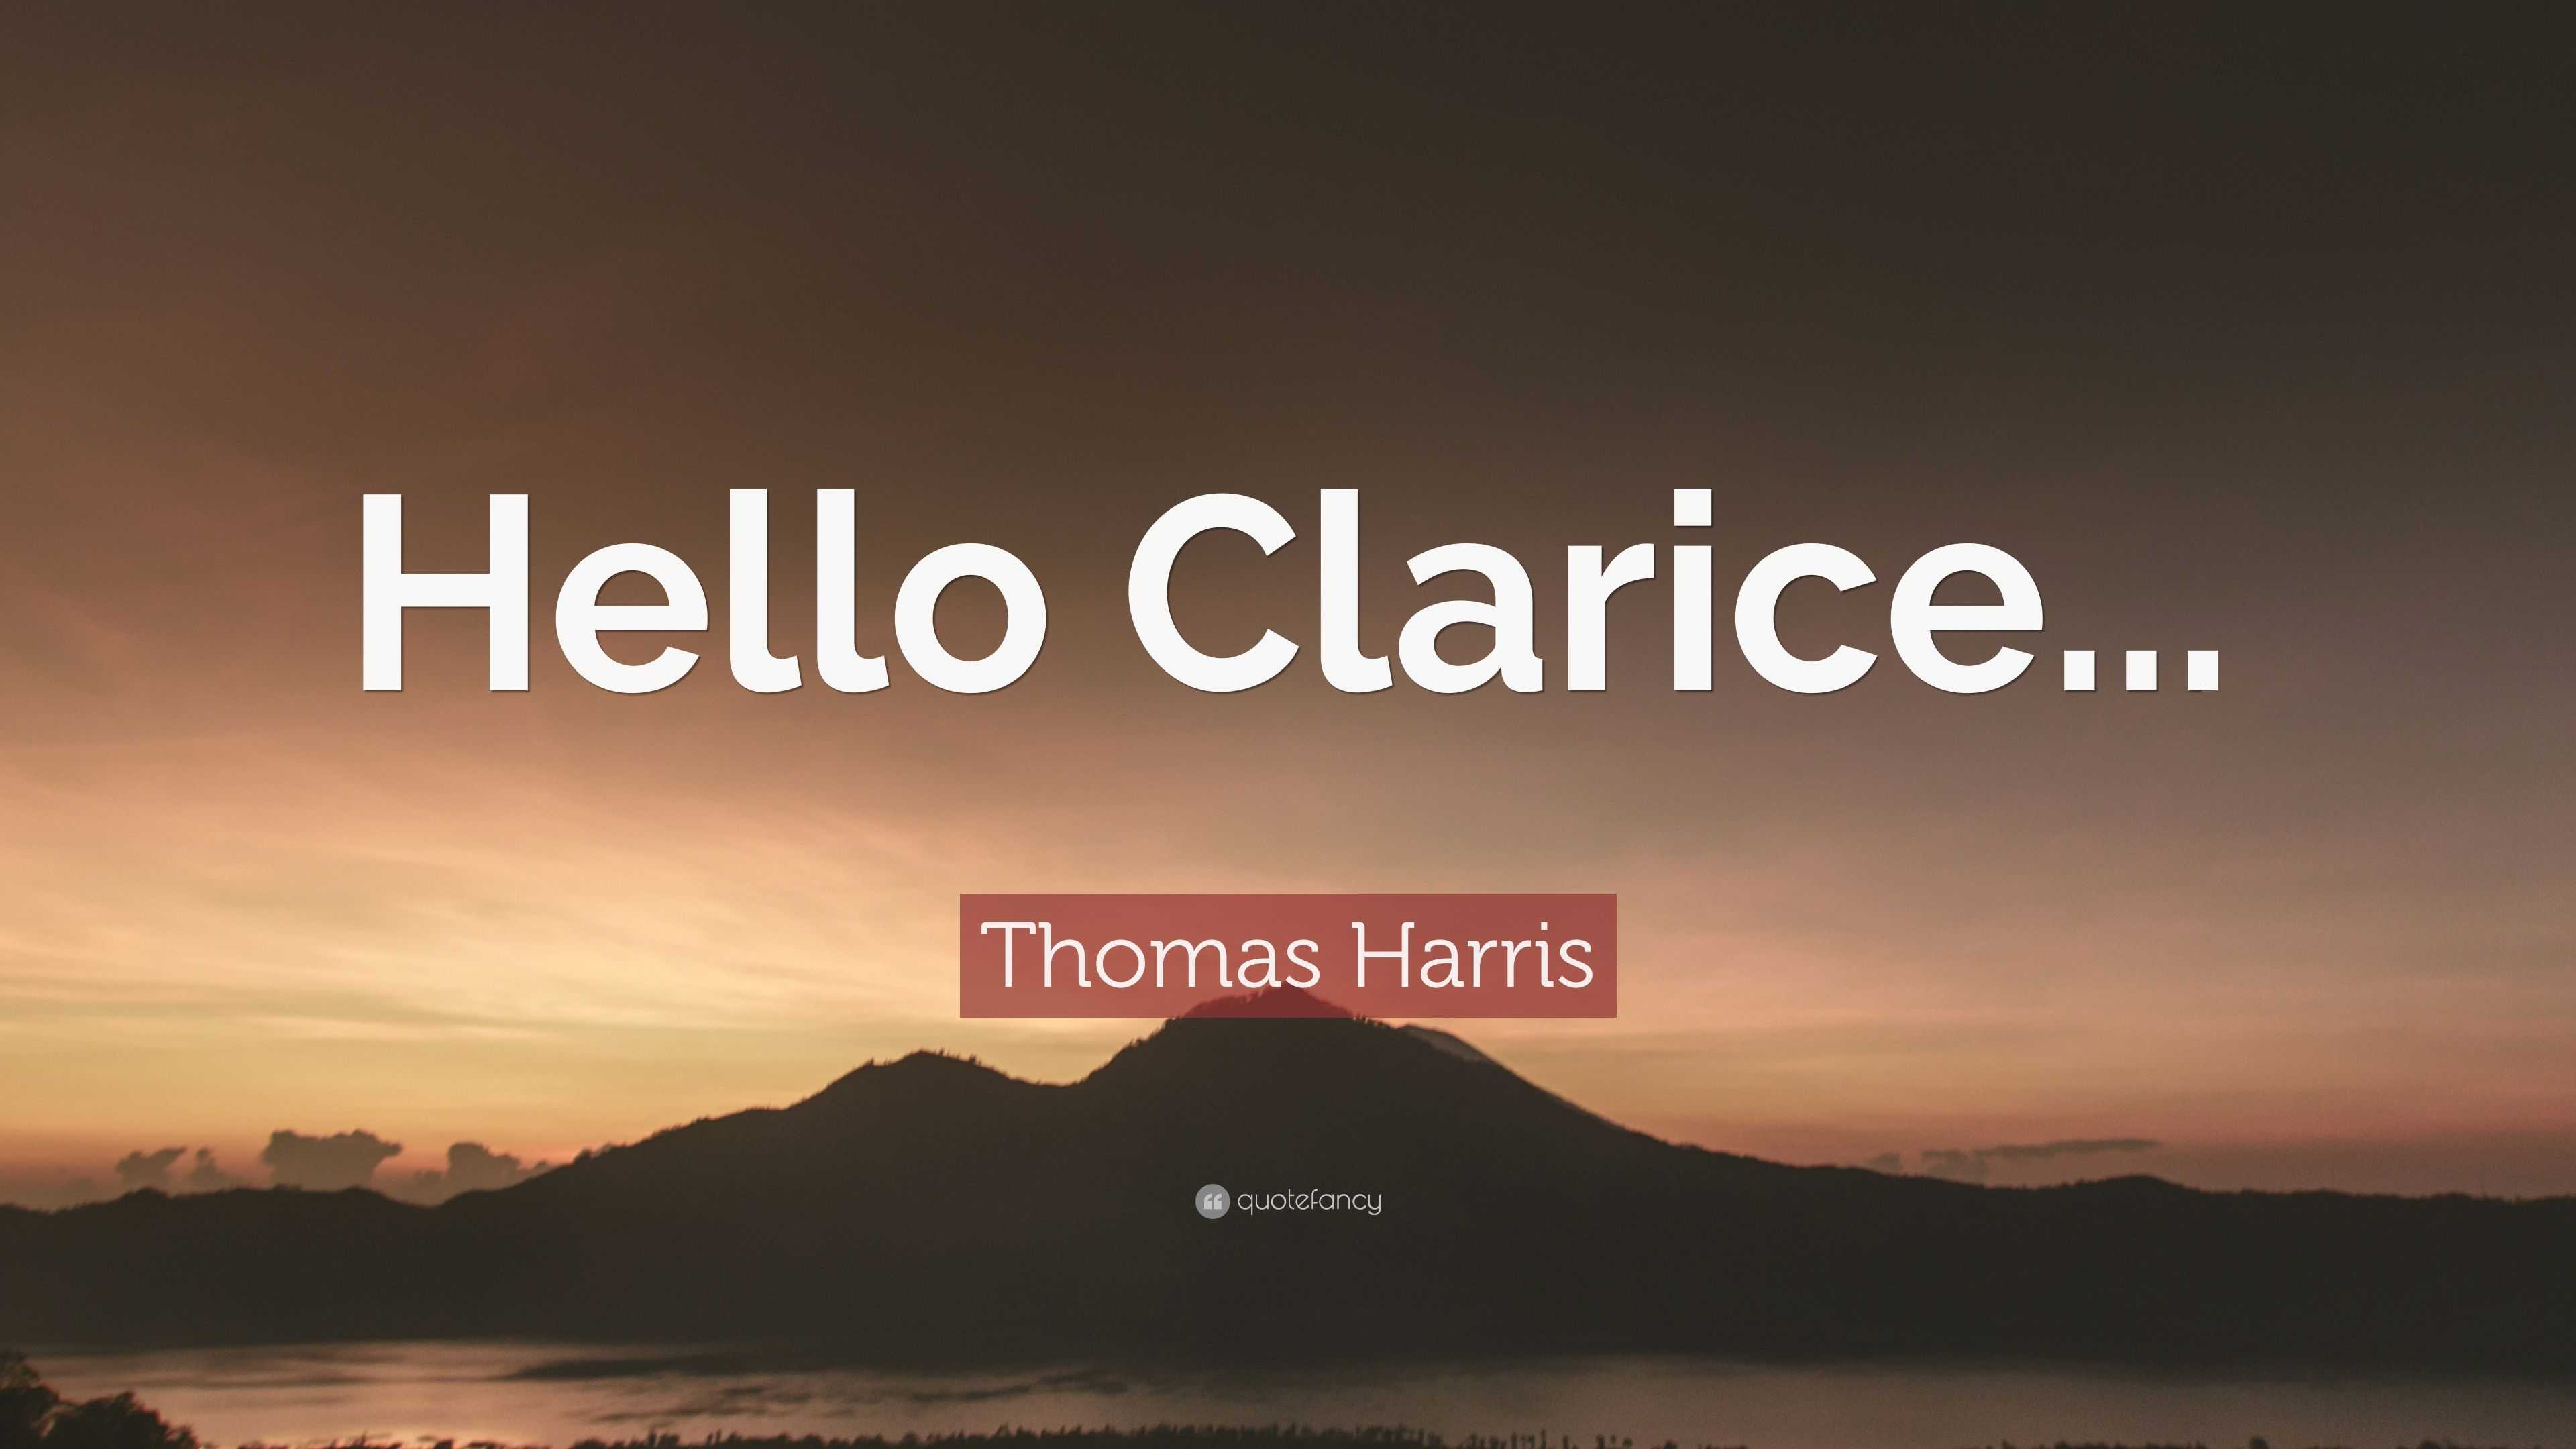 Thomas Harris Quote Hello Clarice 10 Wallpapers Quotefancy Images, Photos, Reviews